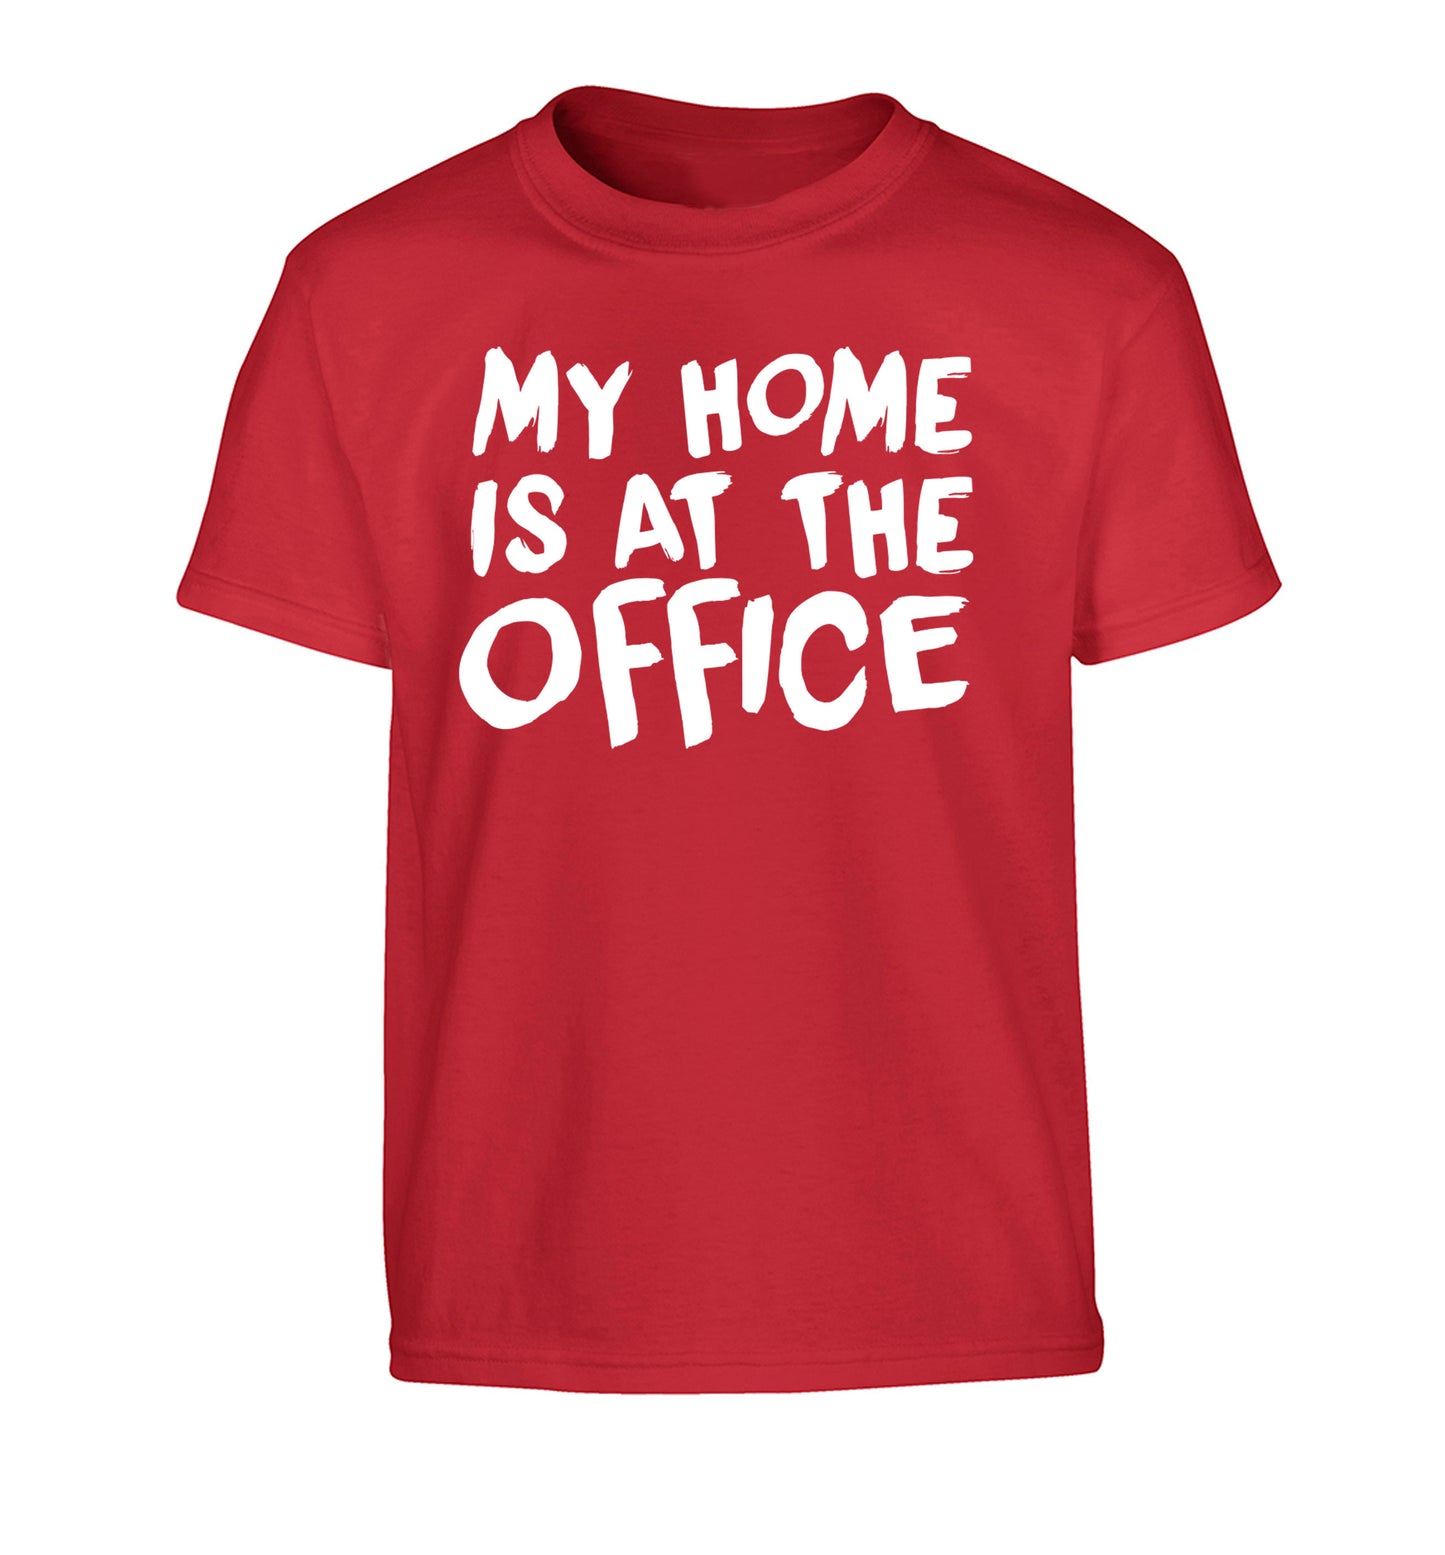 My home is at the office Children's red Tshirt 12-14 Years